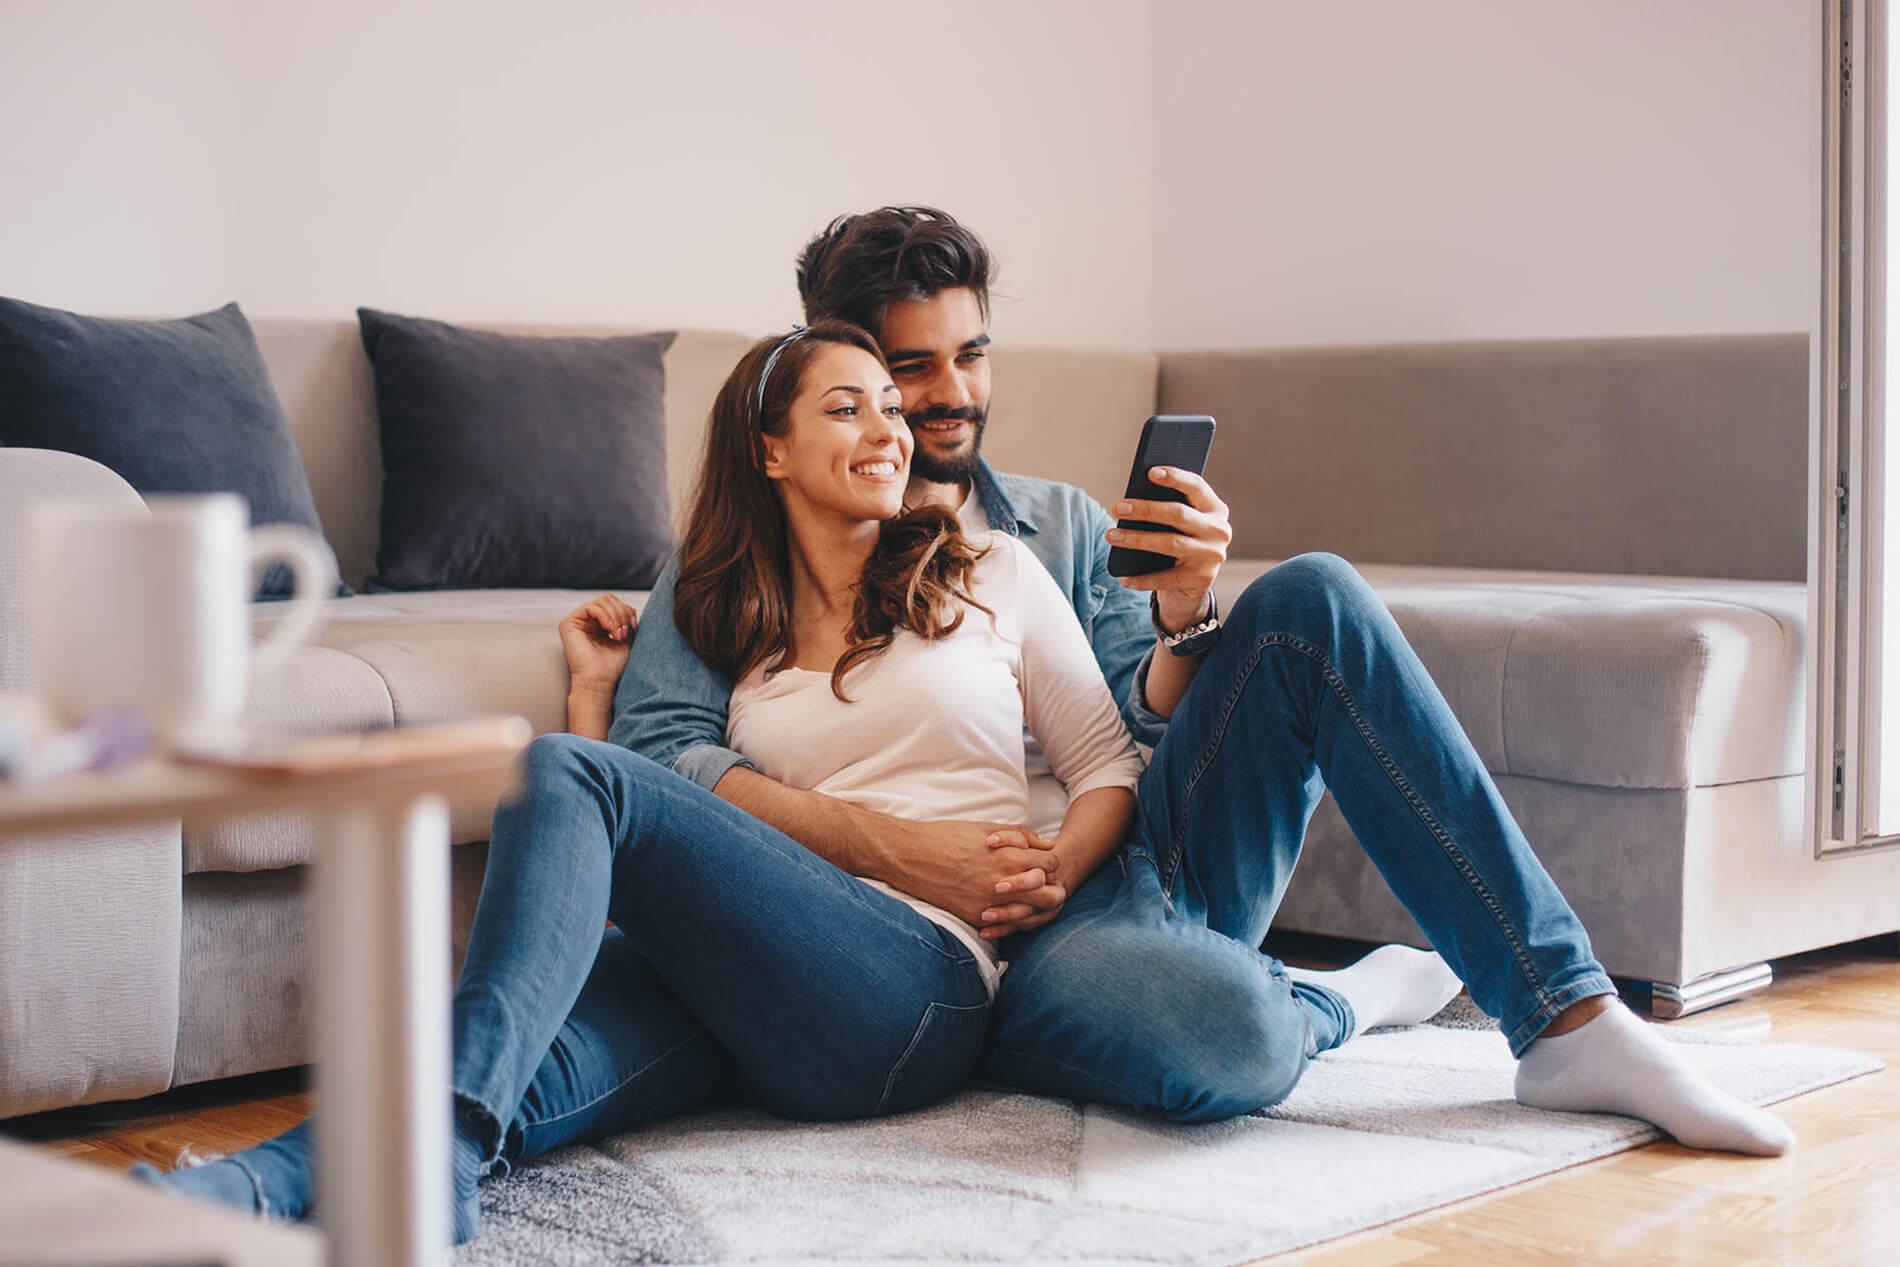 Man and woman lounging on living room floor